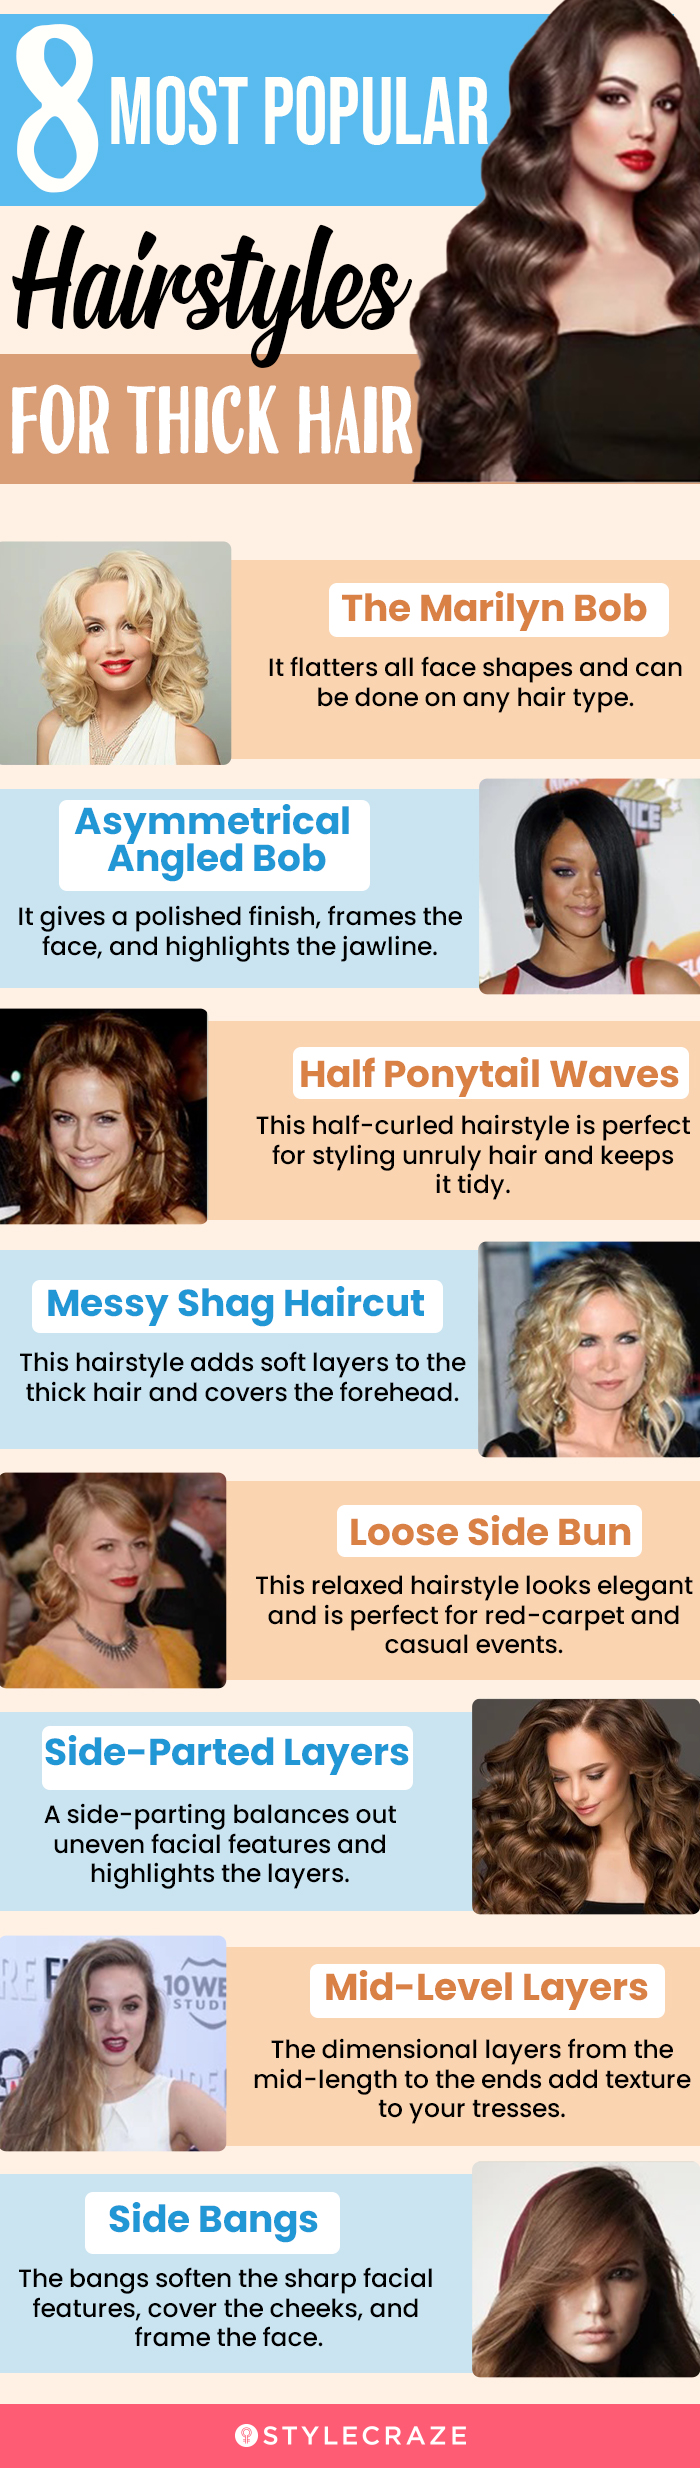 8 most popular hairstyles for thick hair (infographic)